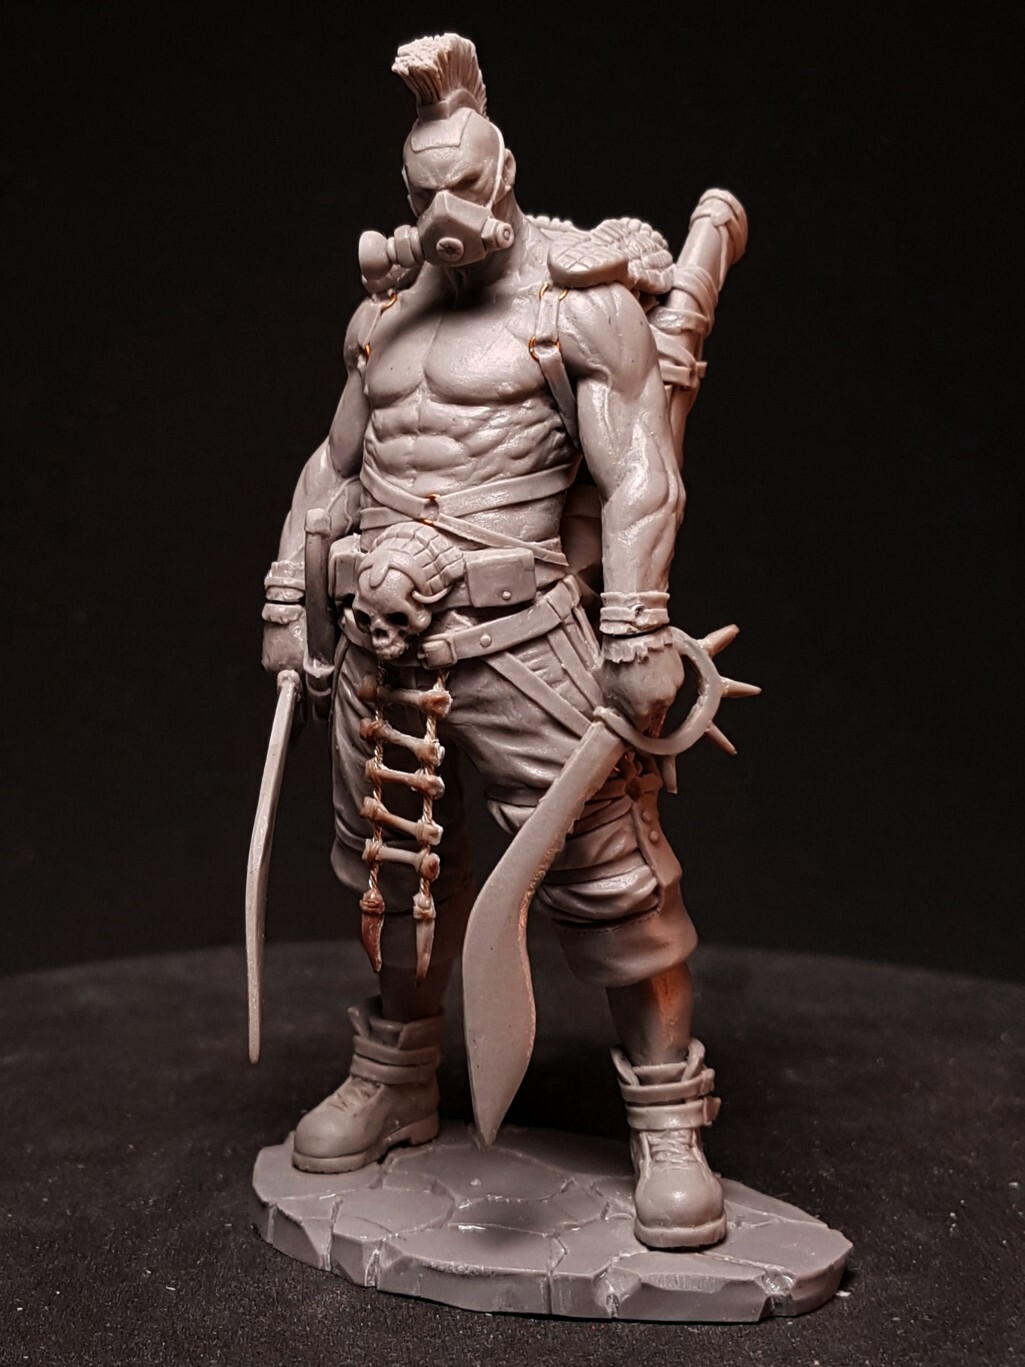 ArtStation - Getting to grips with Super Sculpey